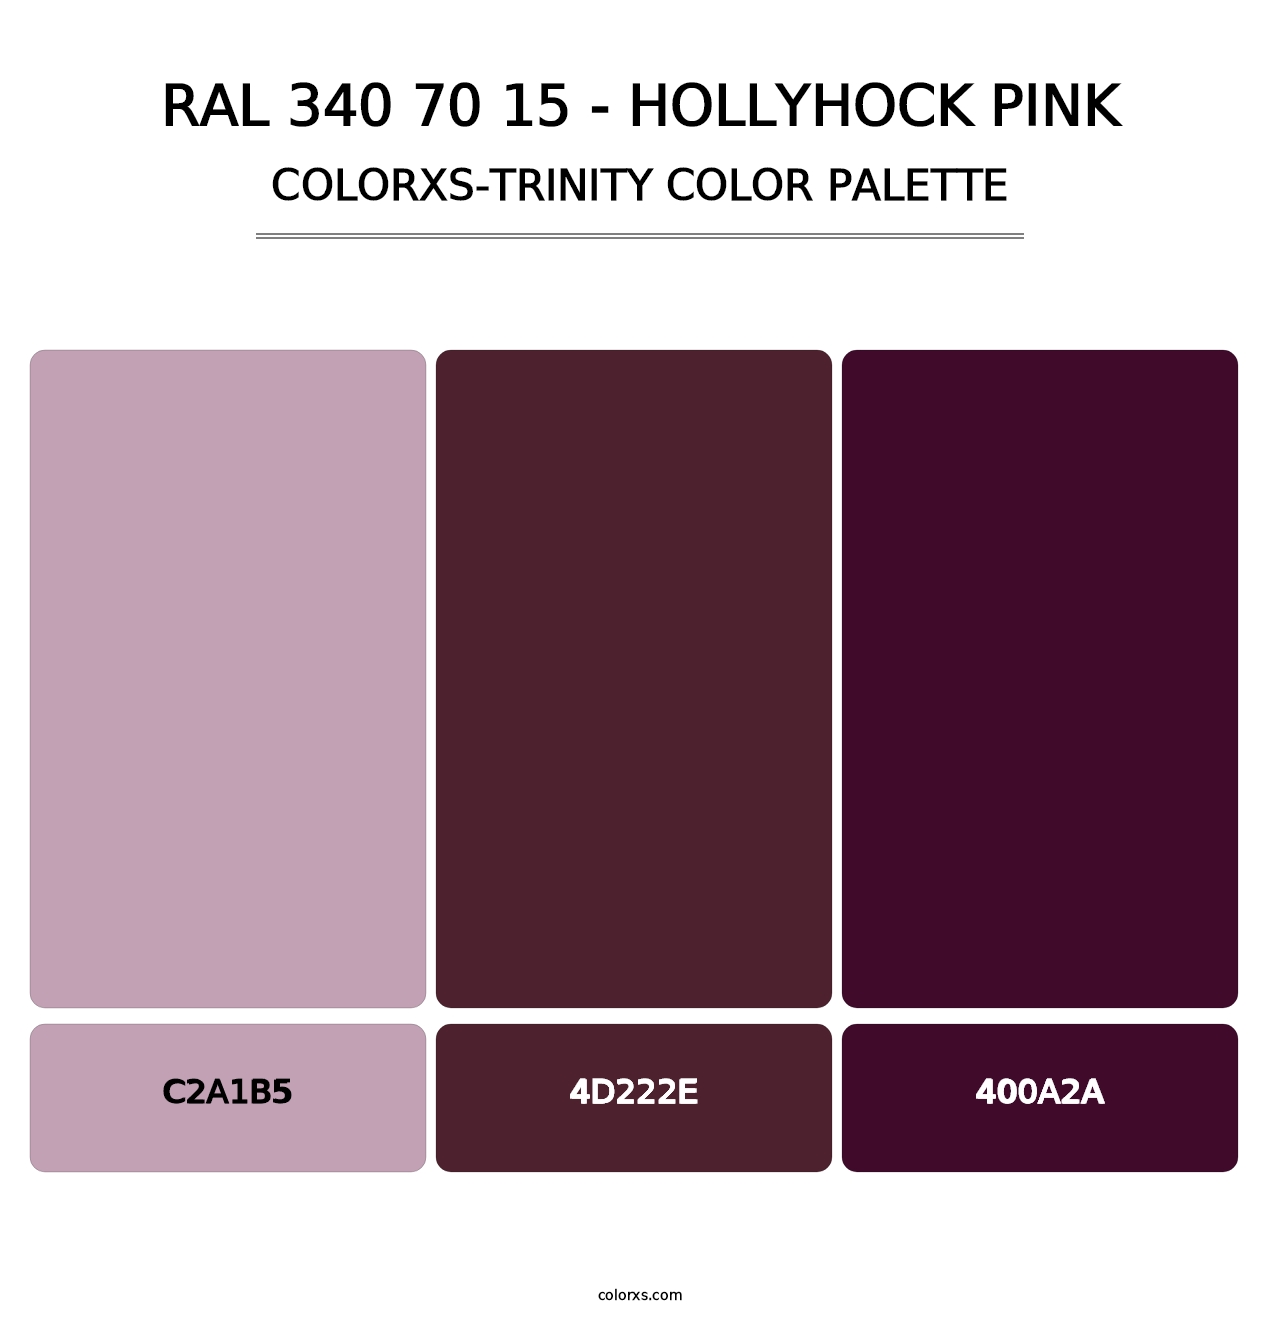 RAL 340 70 15 - Hollyhock Pink - Colorxs Trinity Palette